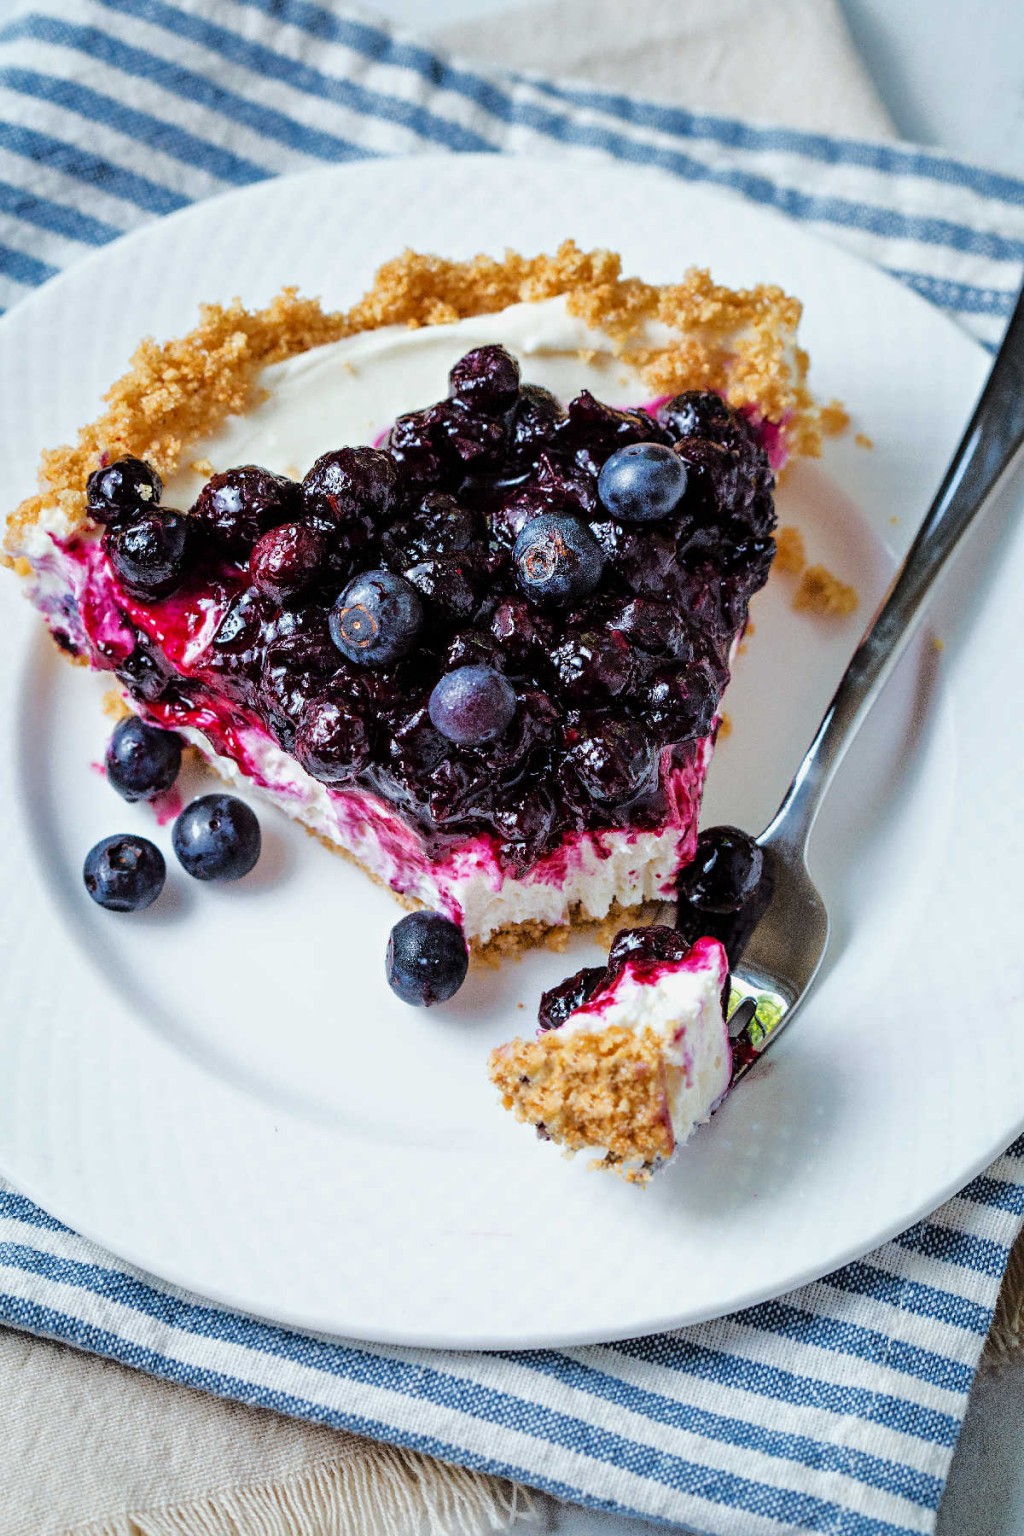 ﻿No Bake Blueberry Cheesecake - Life, Love, and Good Food